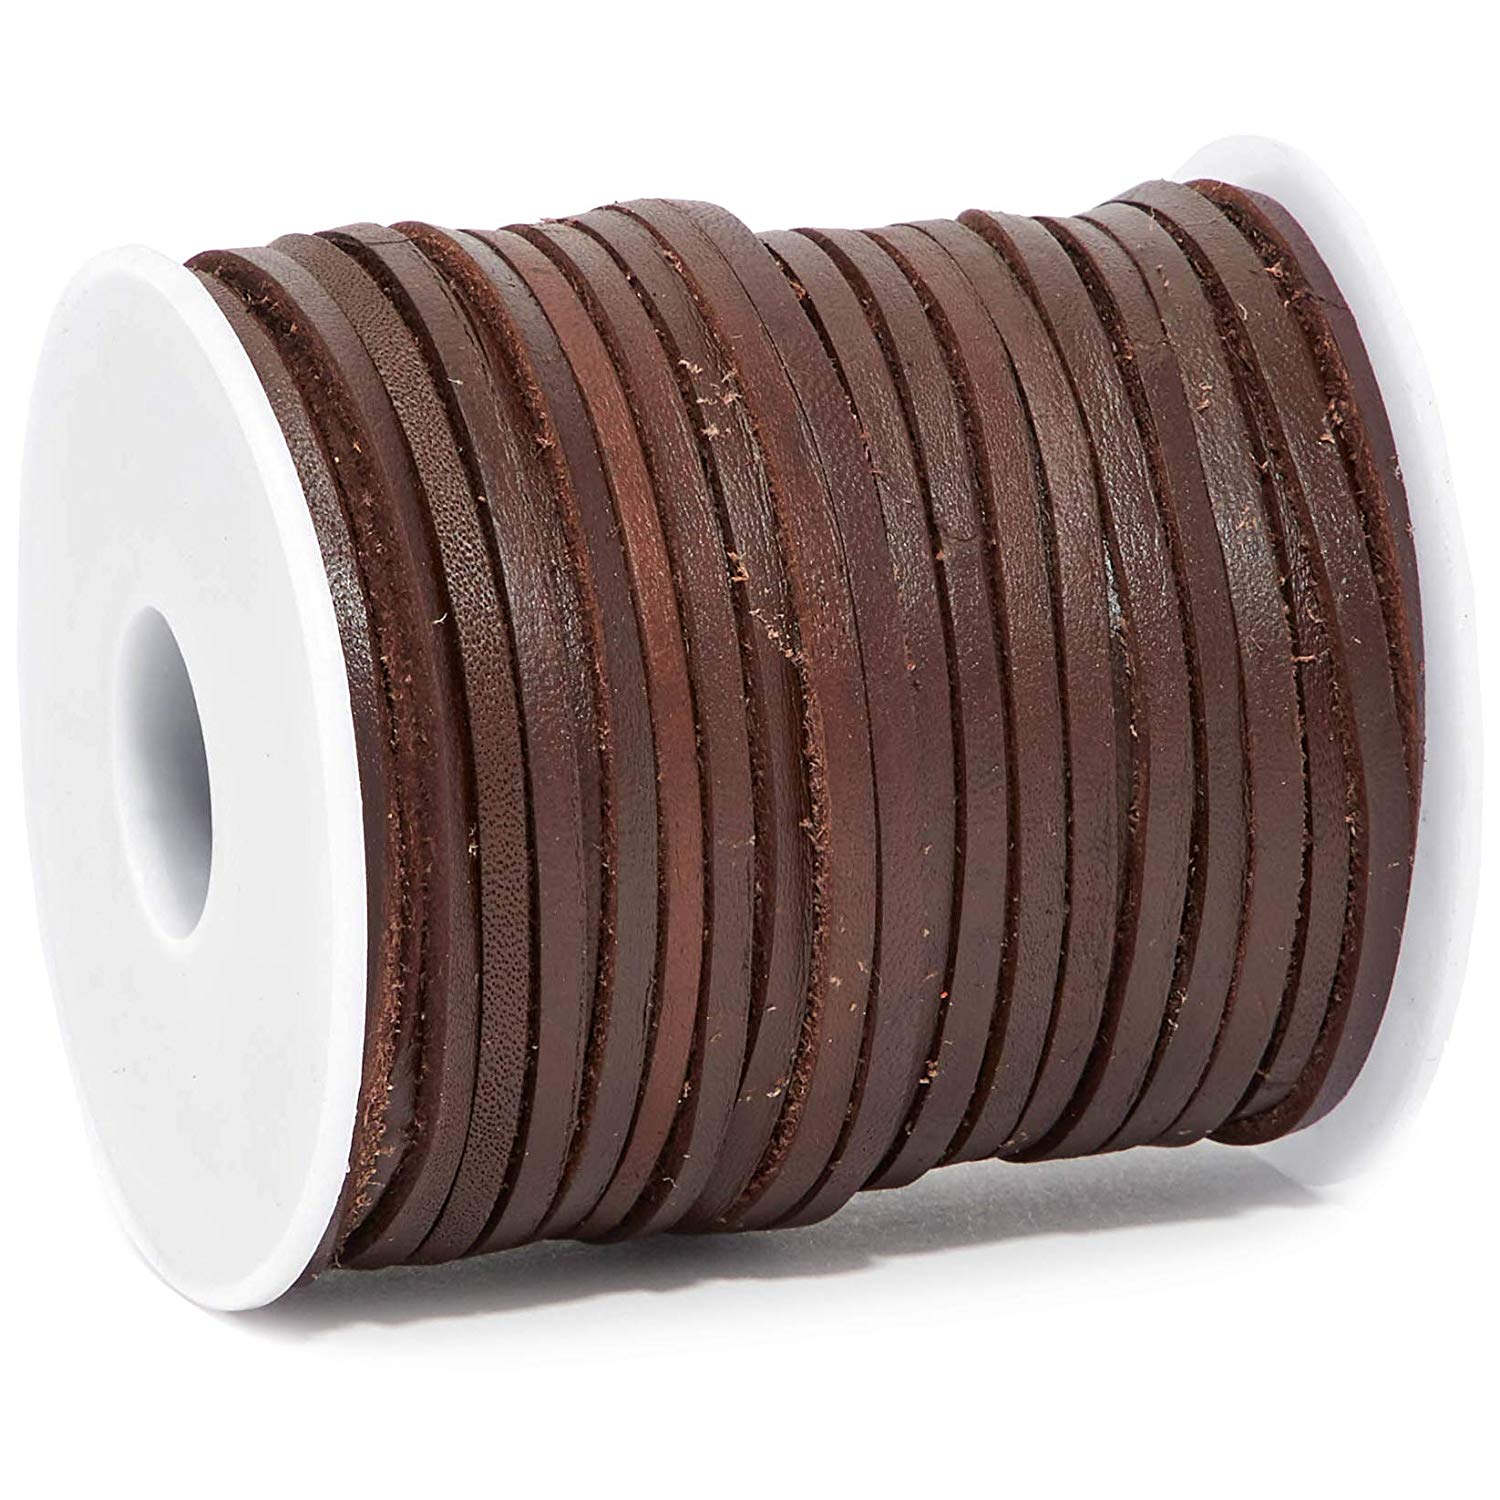 Braided PU Leather String Cord (55 Yards, Light Brown) 